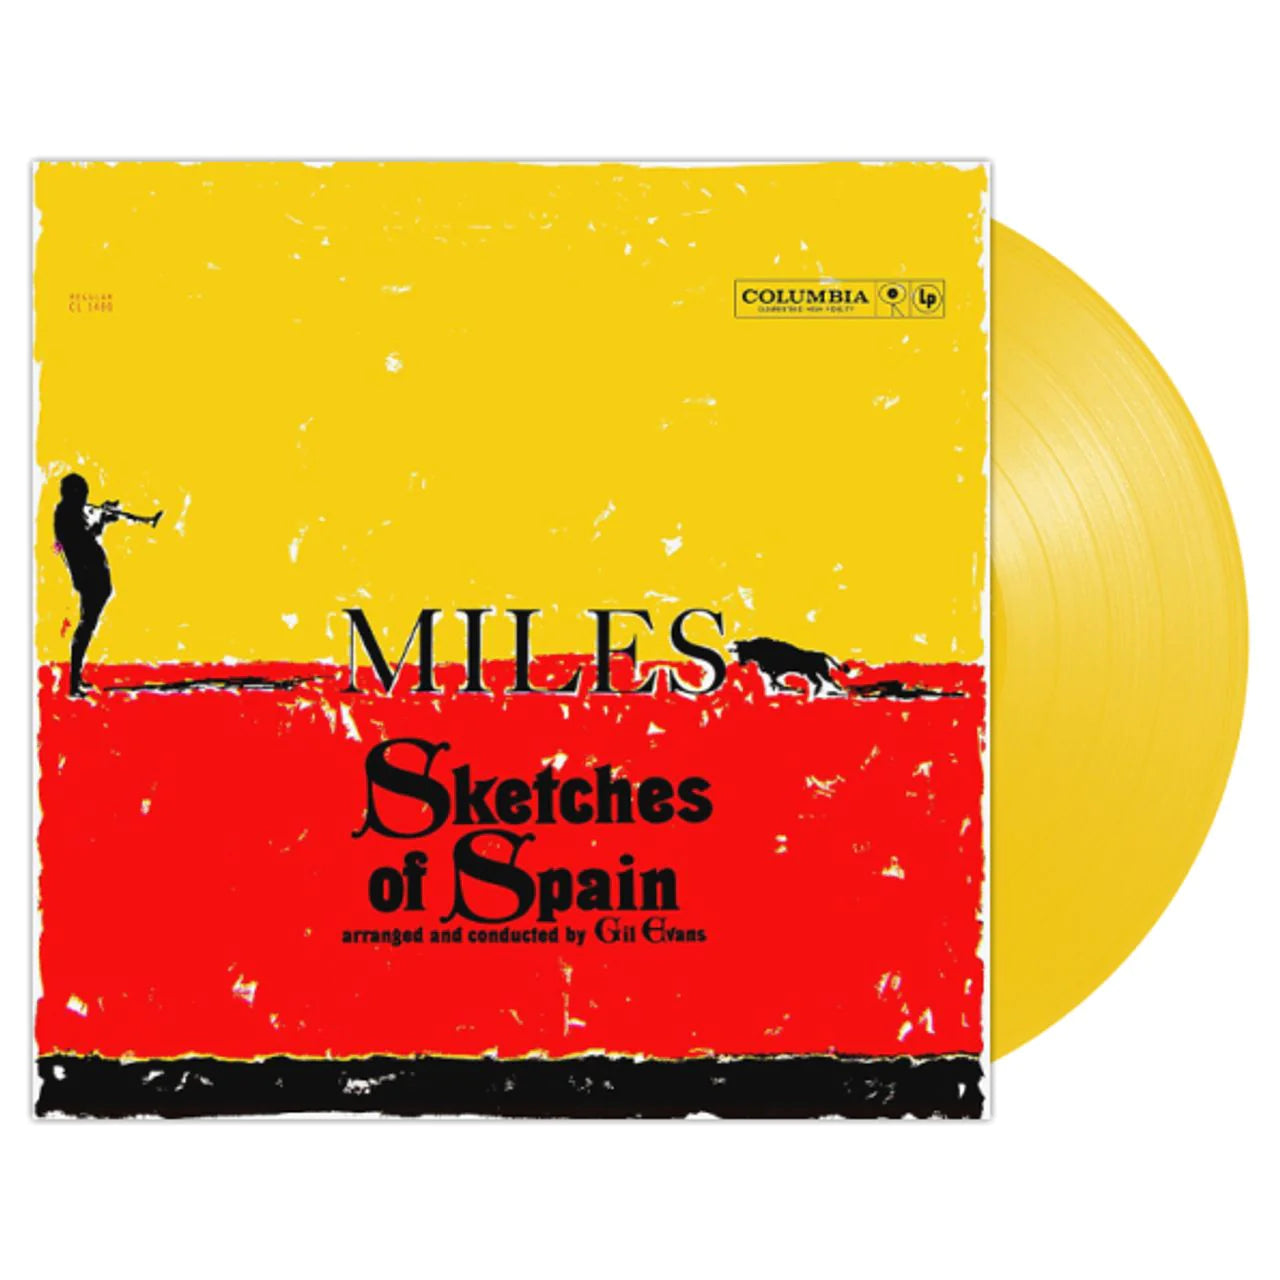 Sketches Of Spain: Limited Edition Yellow Vinyl LP